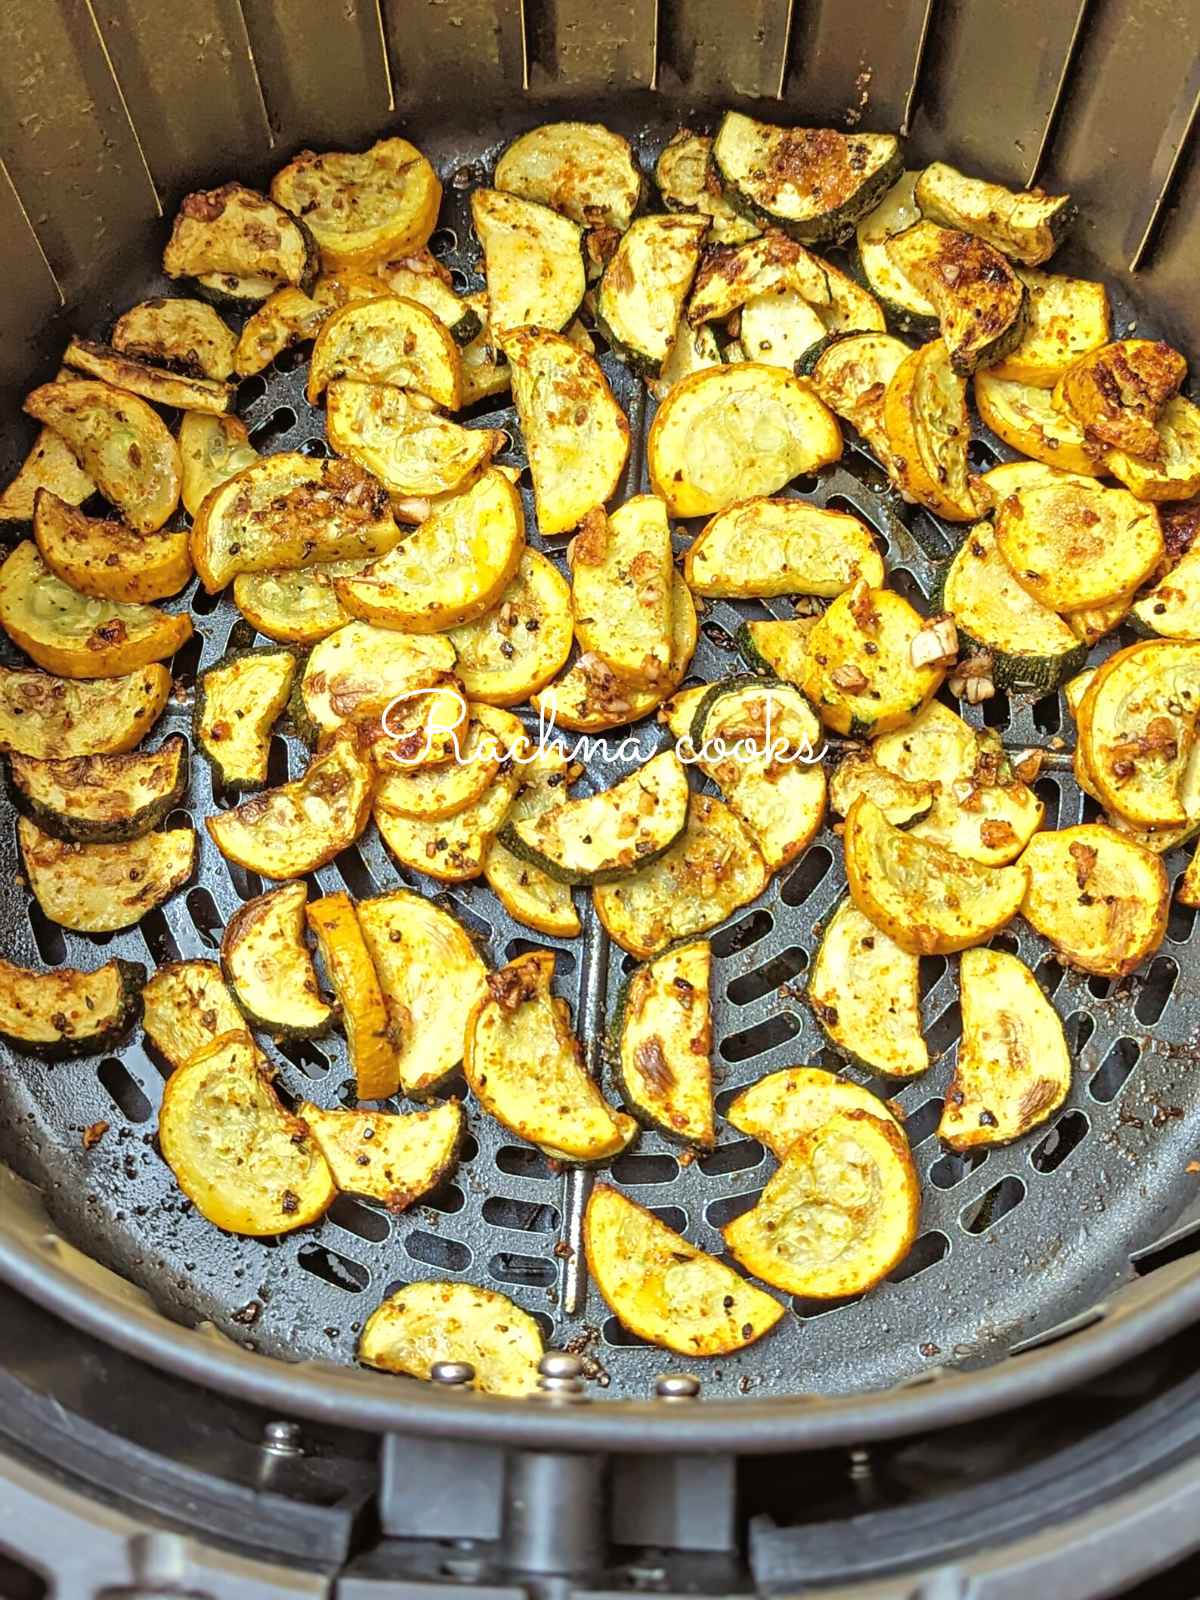 Air fried zucchini and squash in air fryer basket.